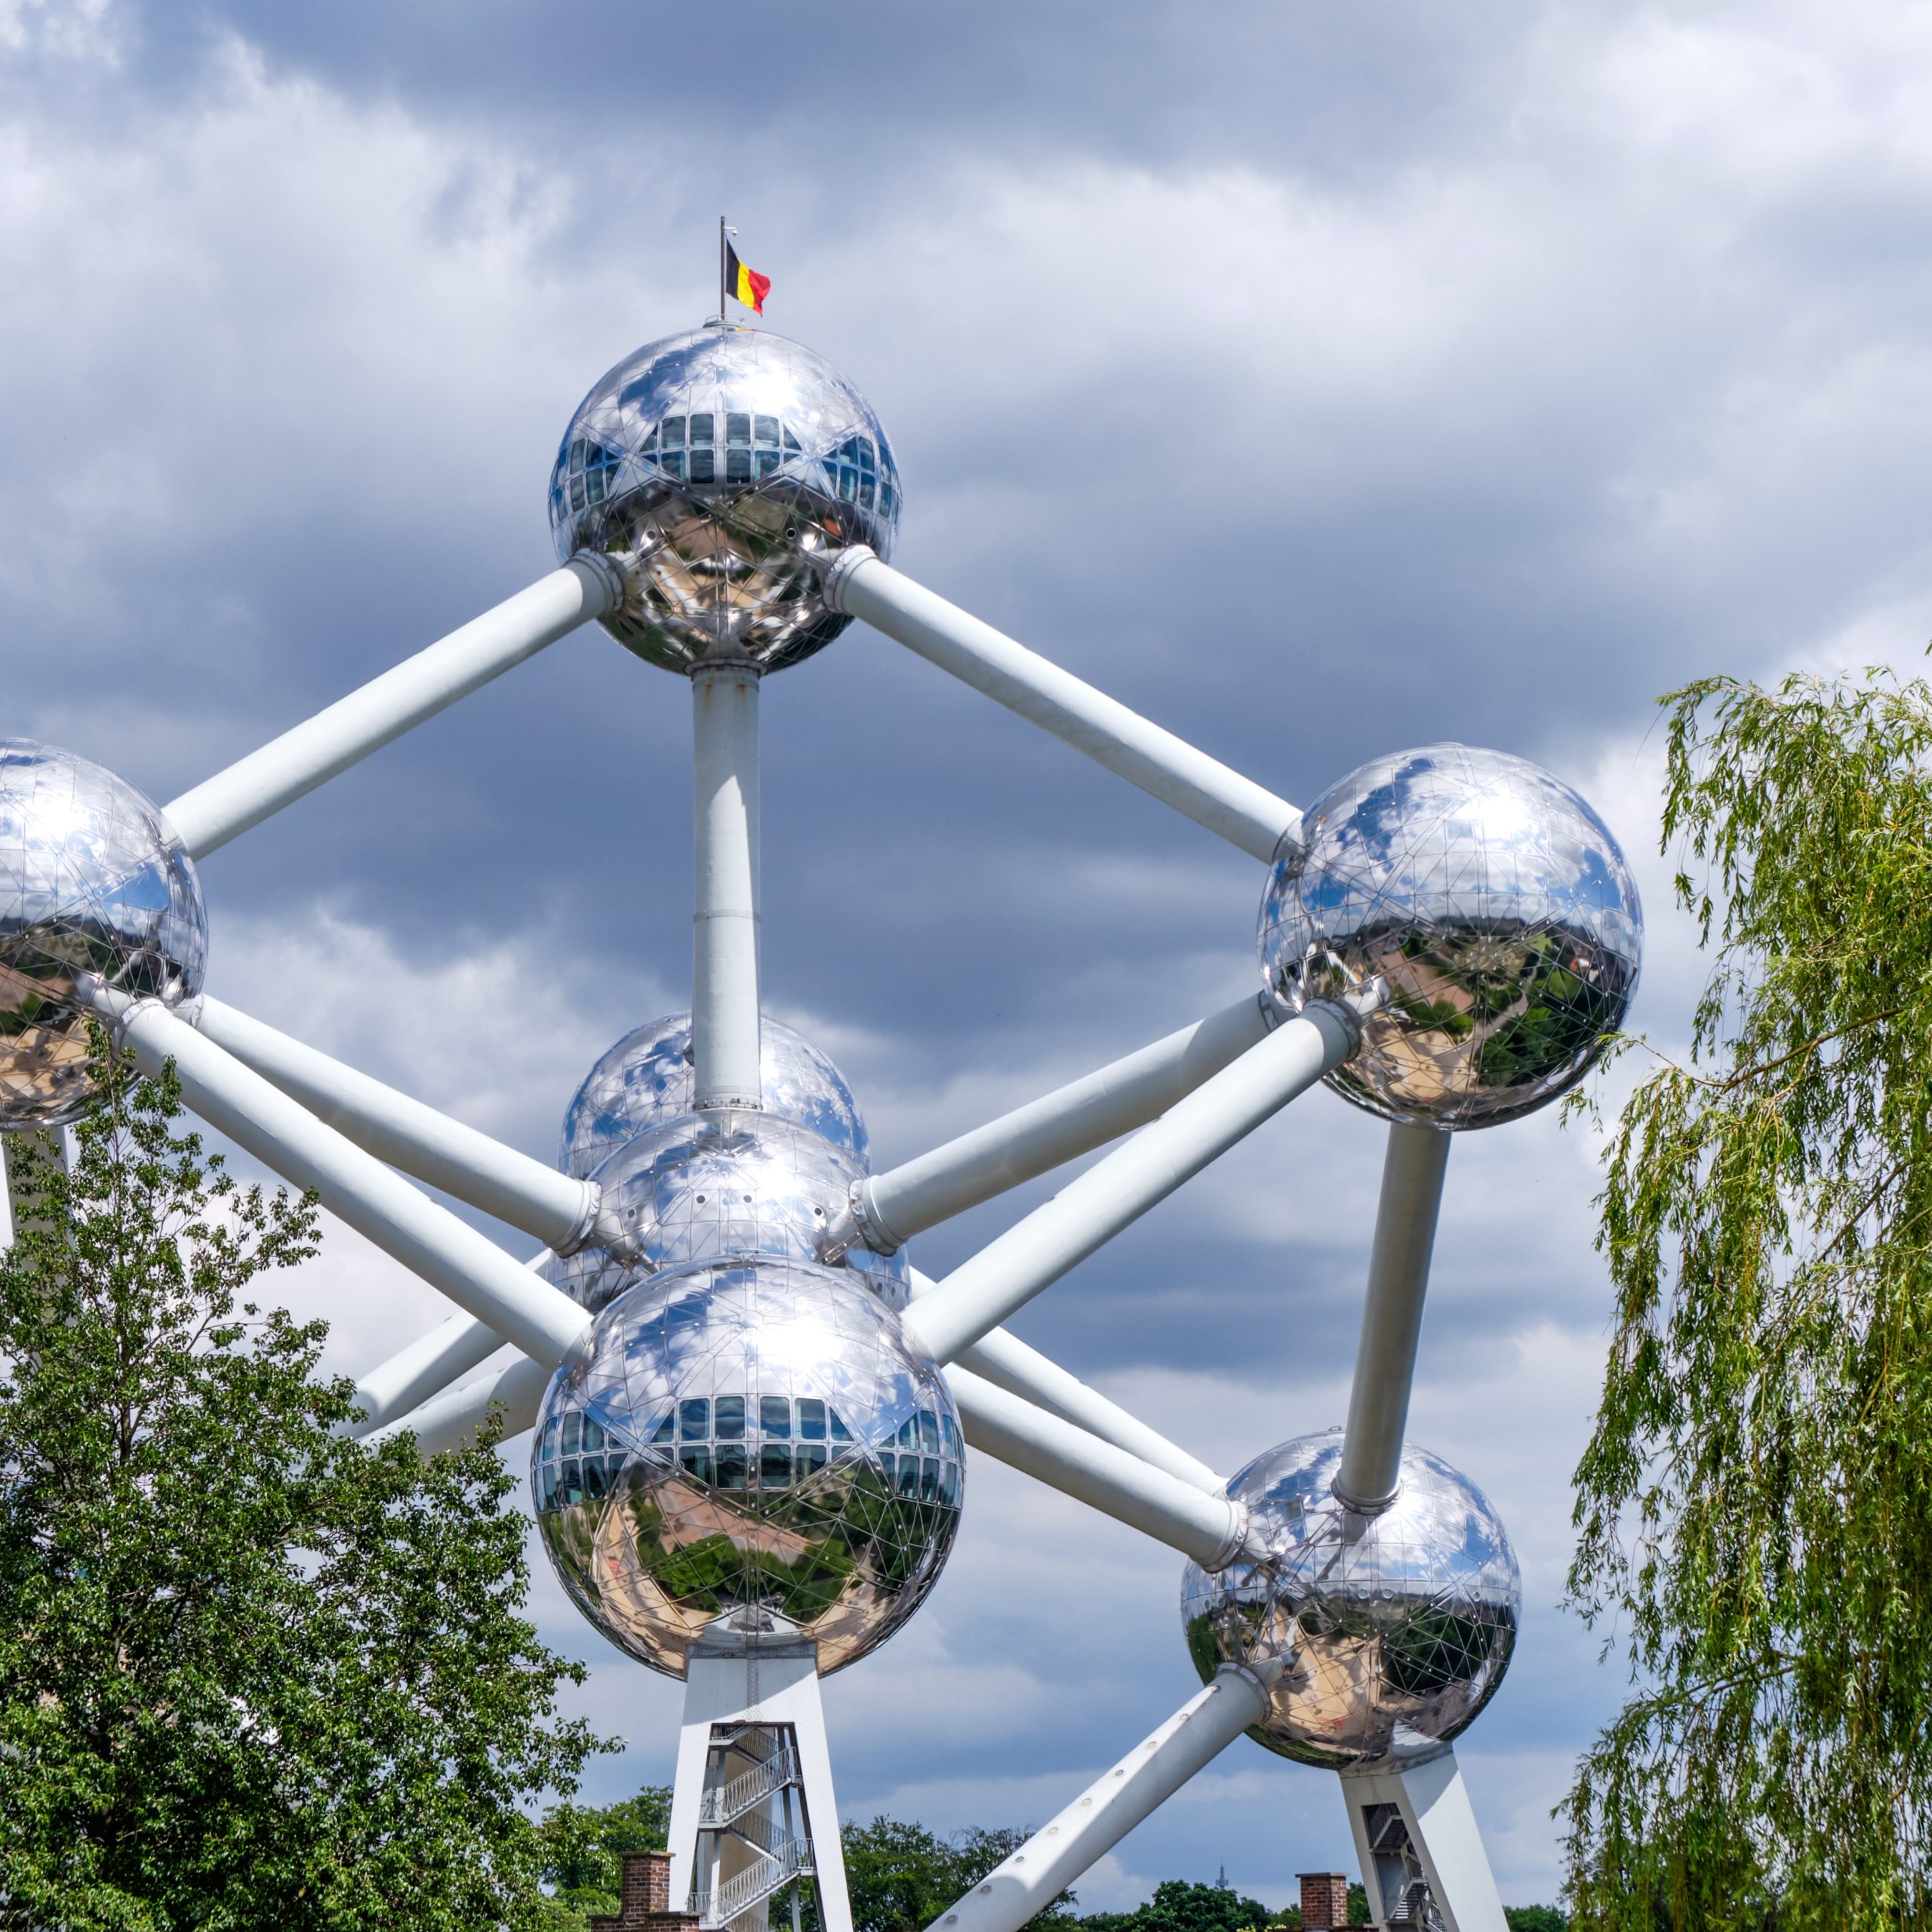 Day 03 - Orientation tour of Brussels - Photostop at Atomium